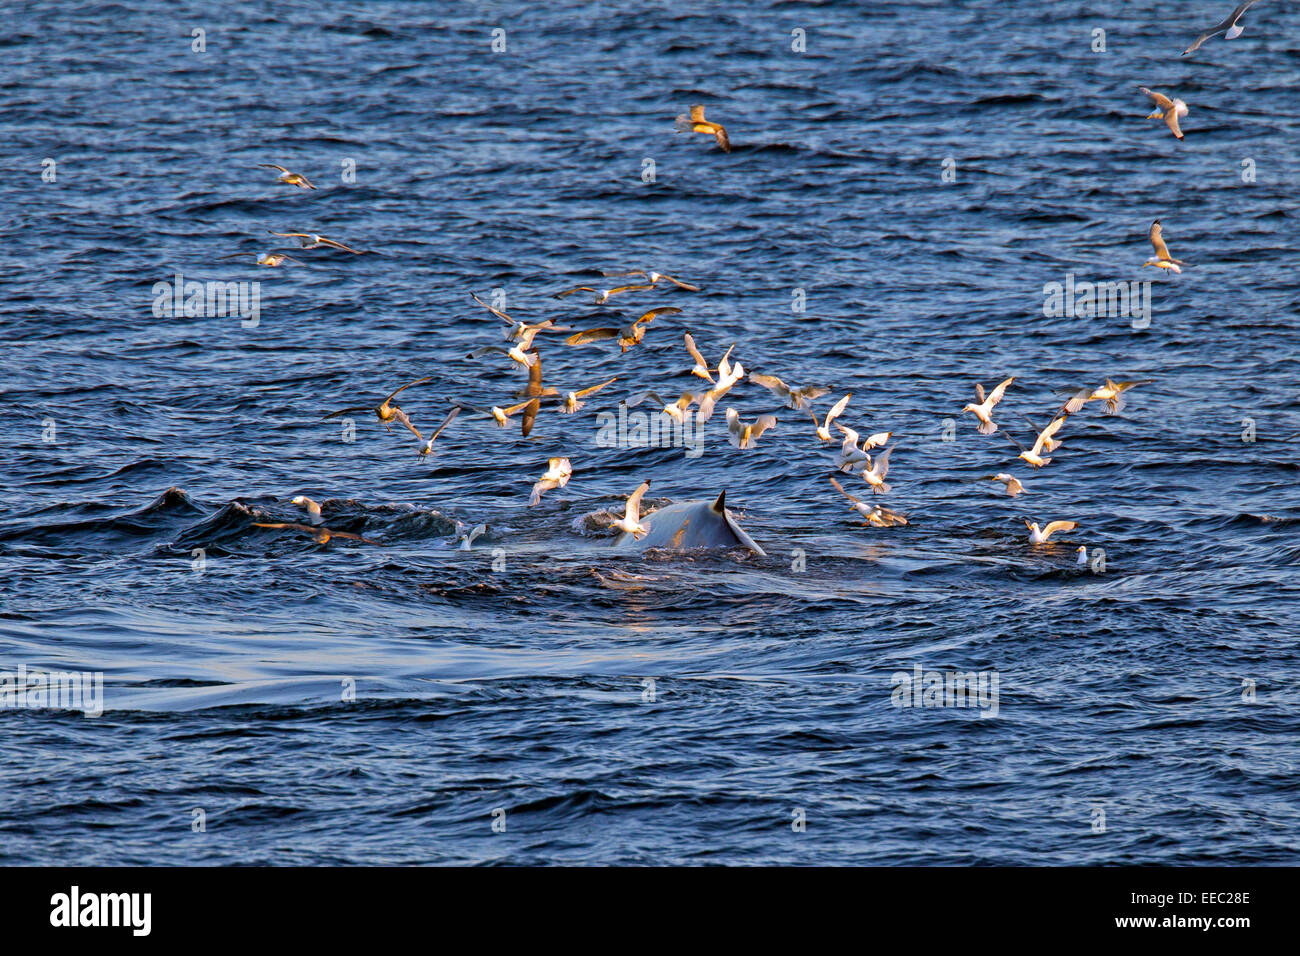 Seagulls swarming over surfacing blue whale (Balaenoptera musculus) Stock Photo